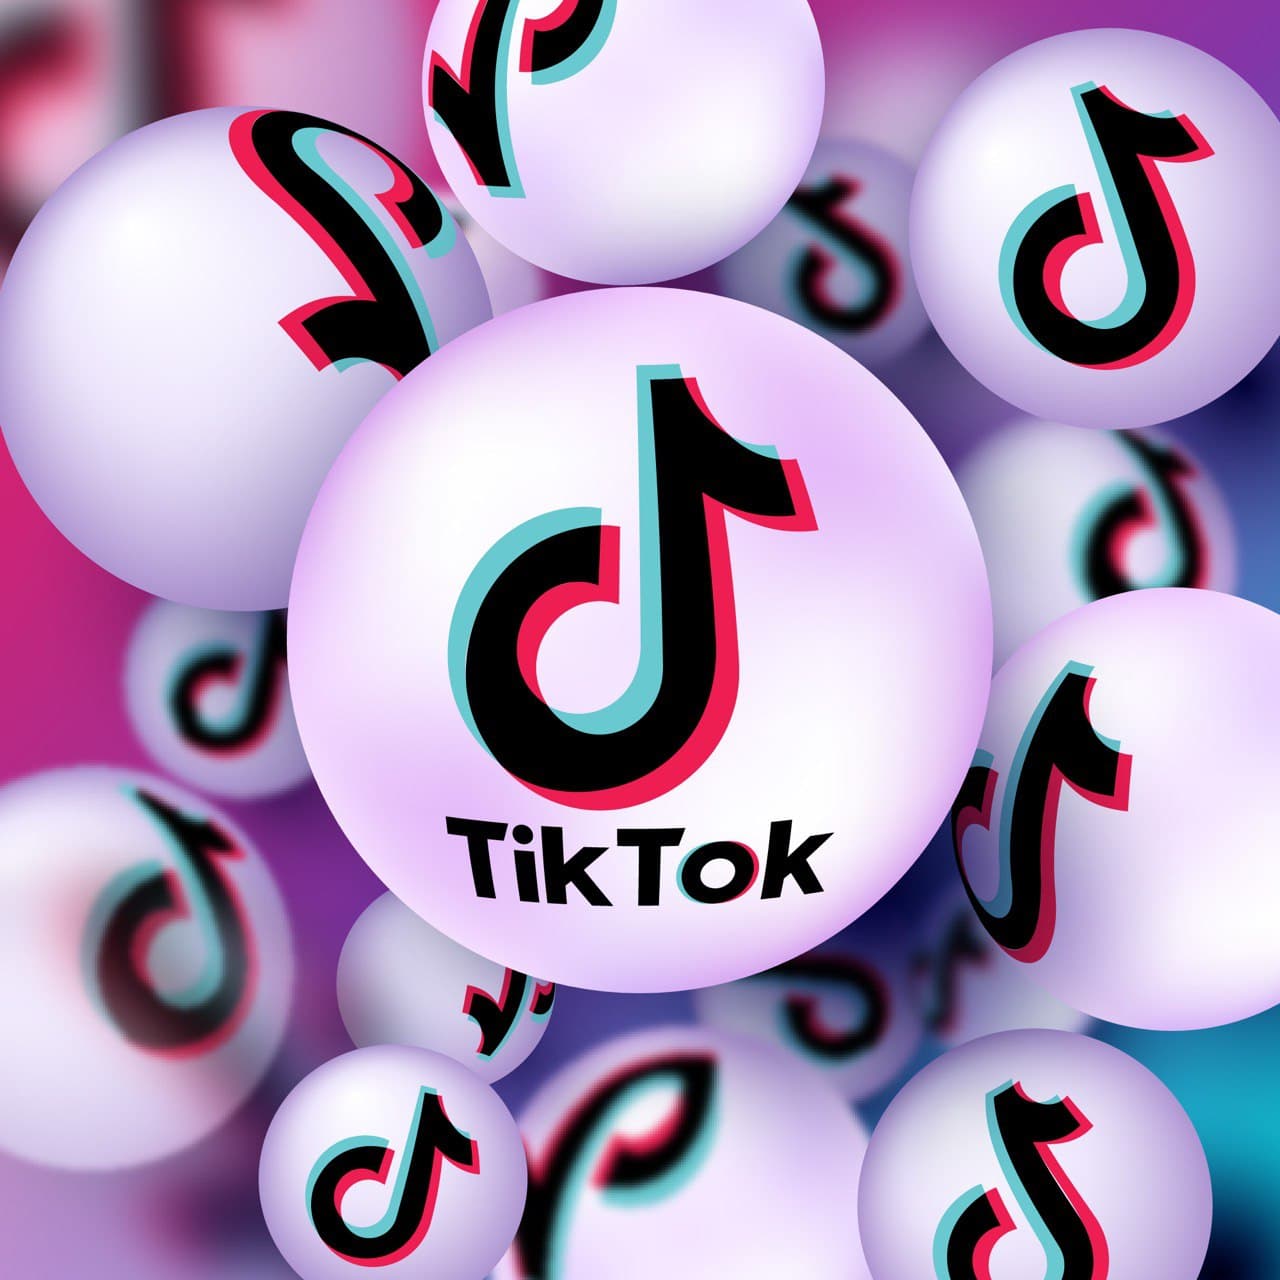 How to Search TikTok Users?